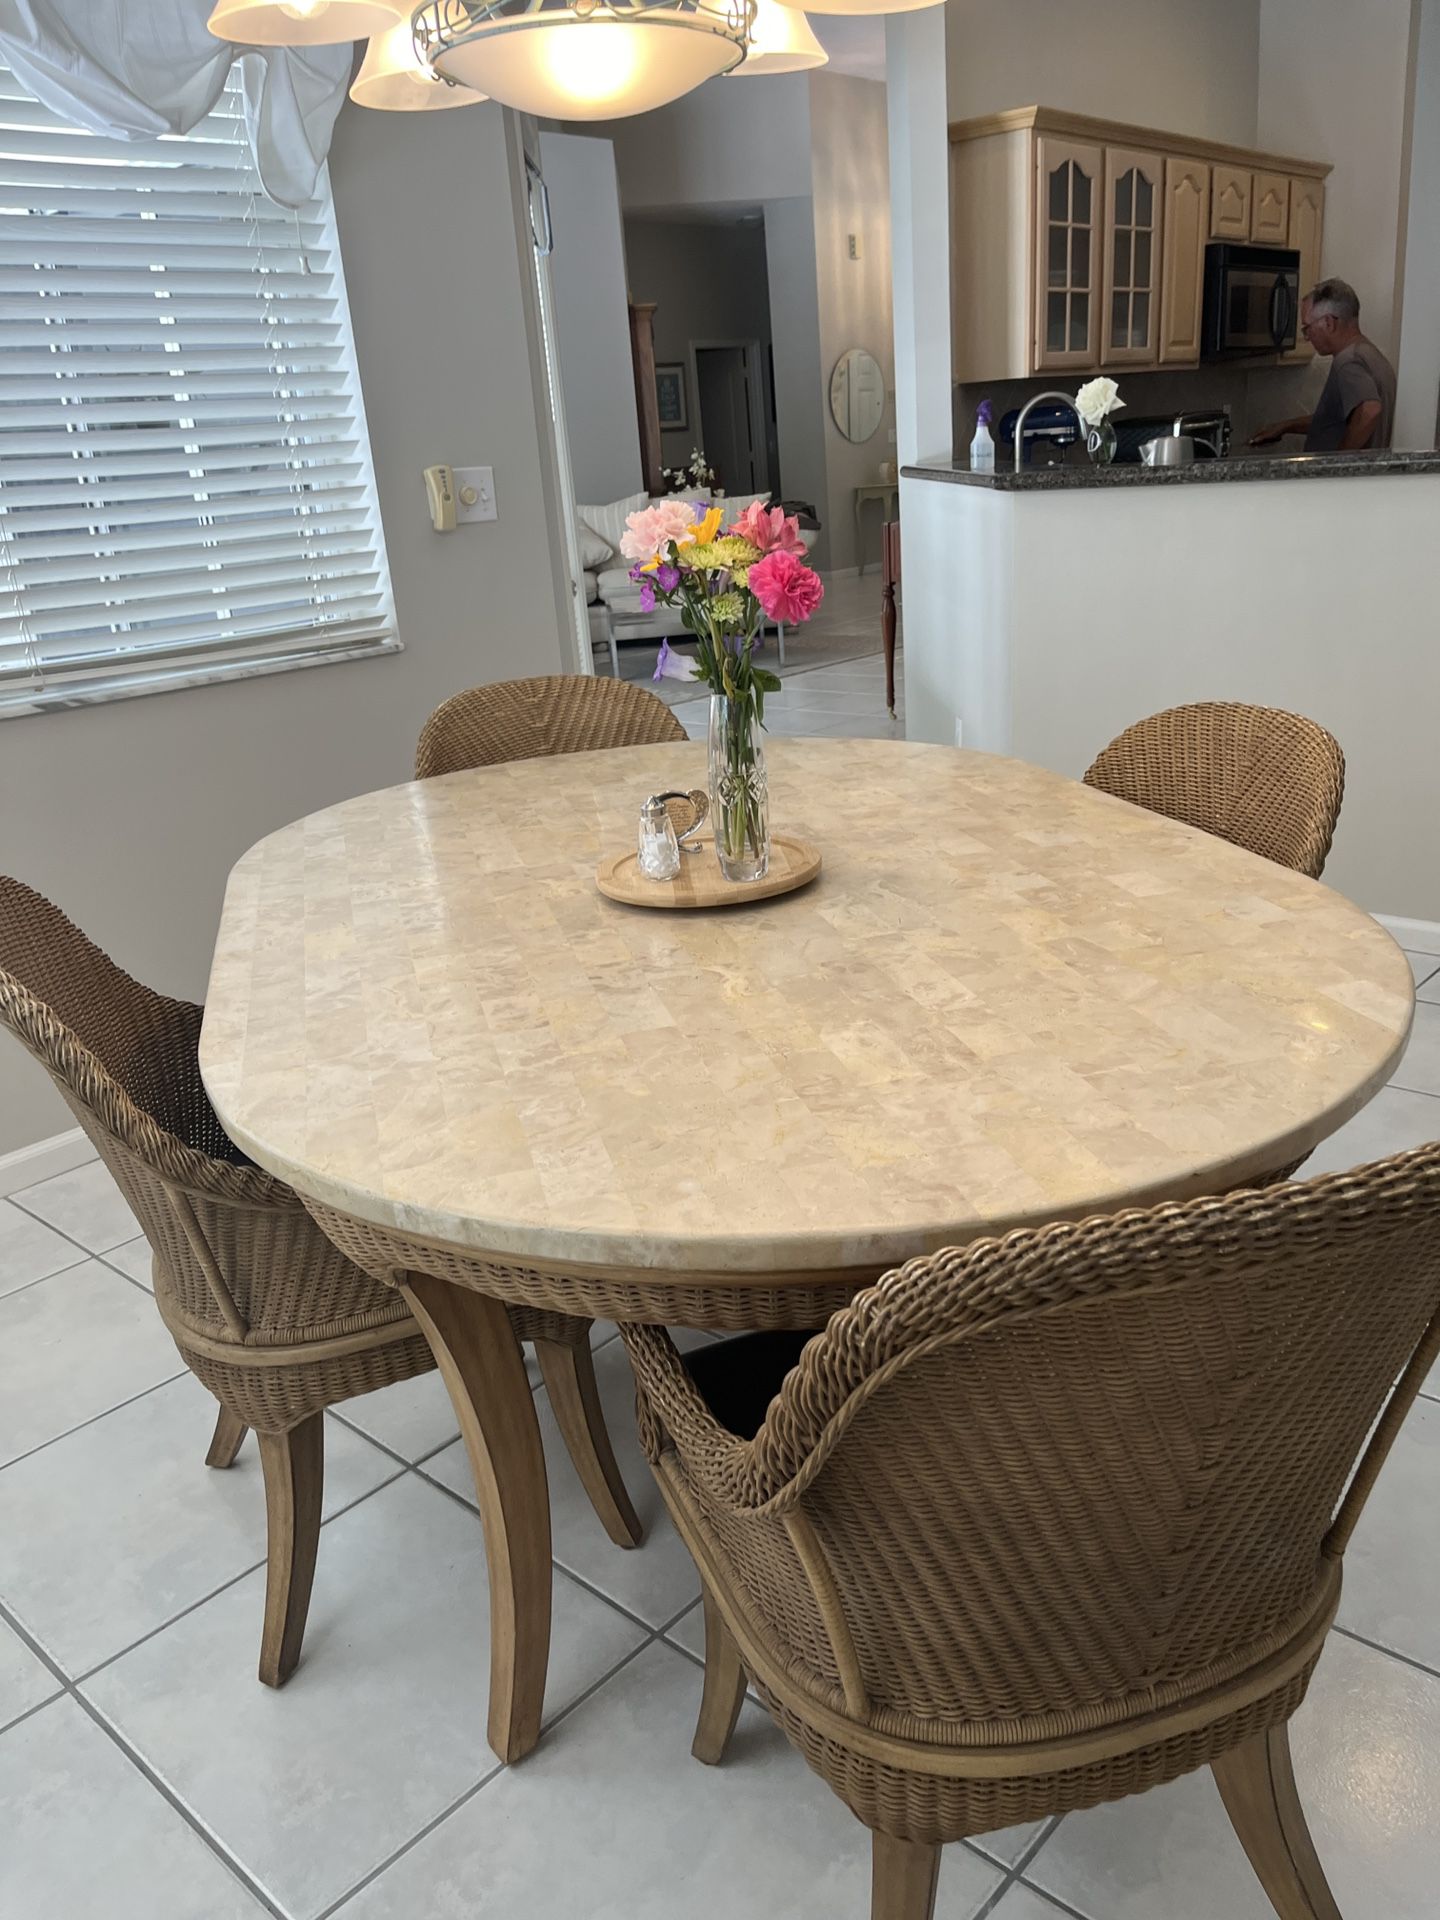 DINING TABLE & 4 WICKER CHAIRS